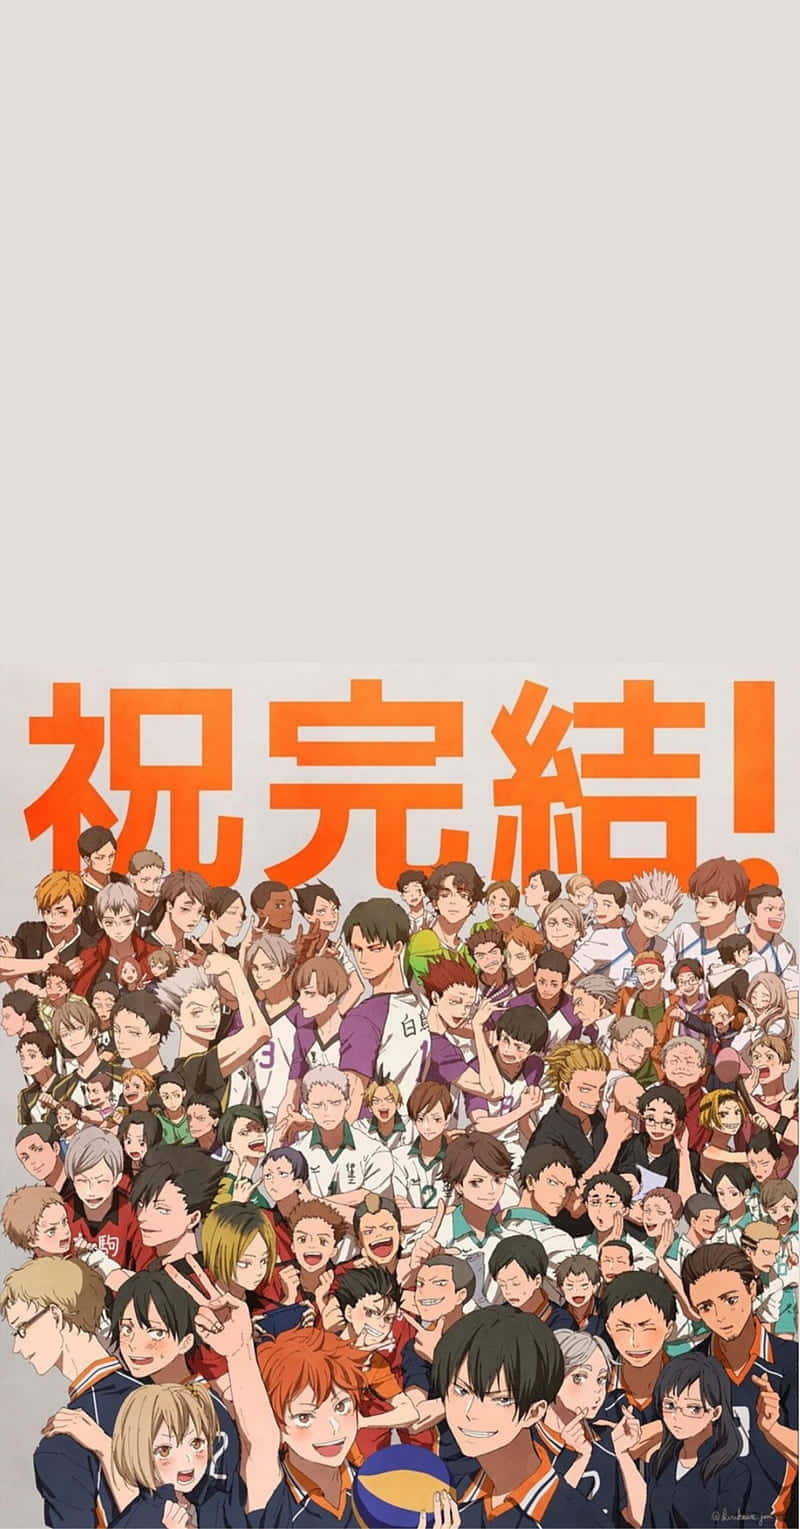 The Nekoma High School volleyball team stands united and determined. Wallpaper